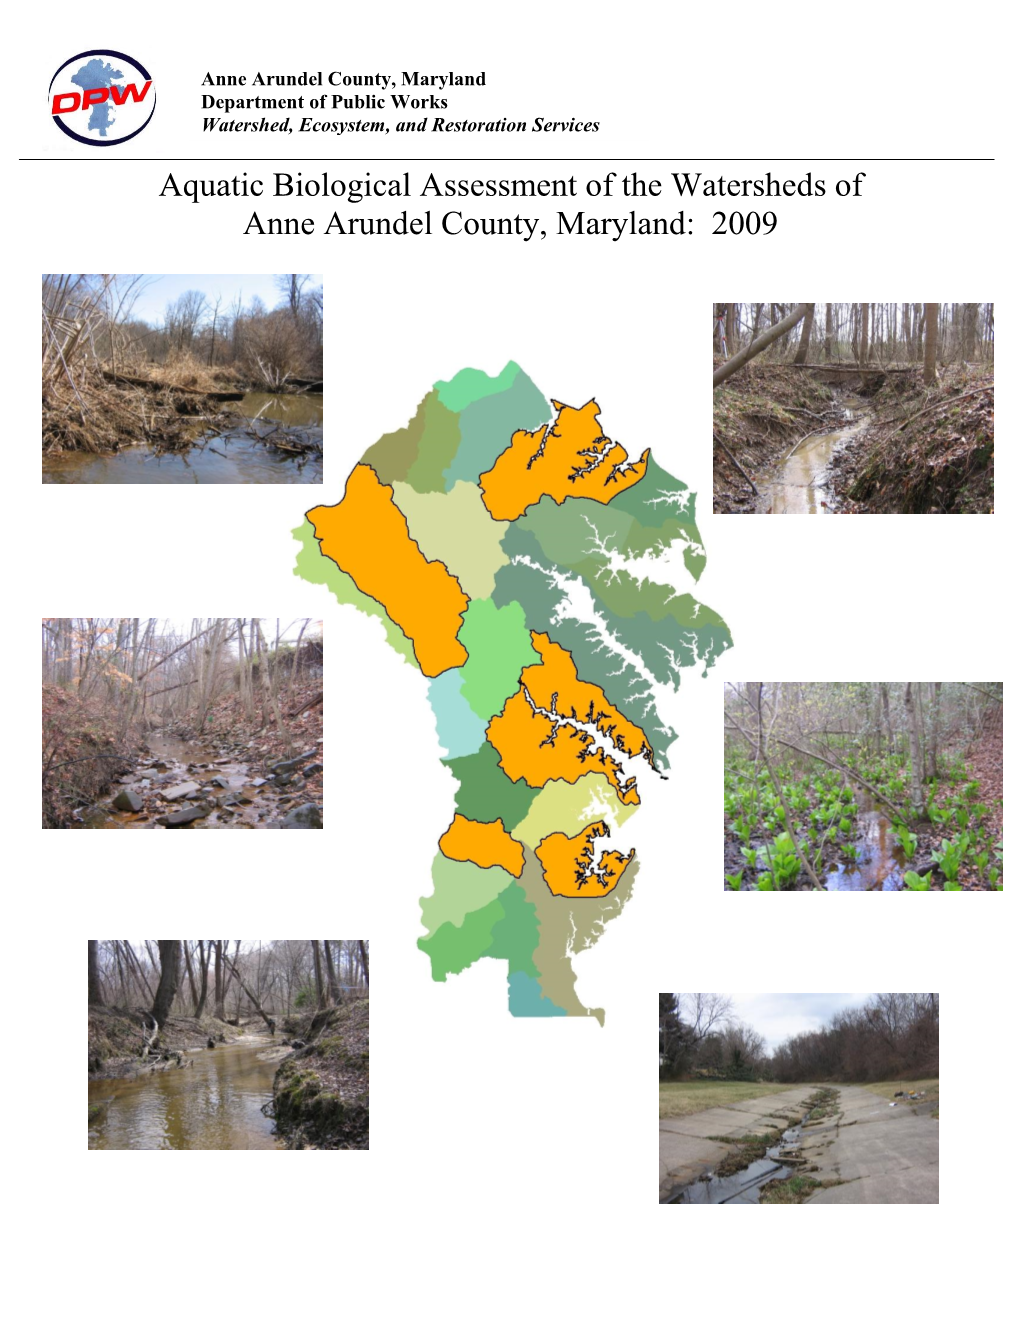 Aquatic Biological Assessment of the Watersheds of Anne Arundel County, Maryland: 2009